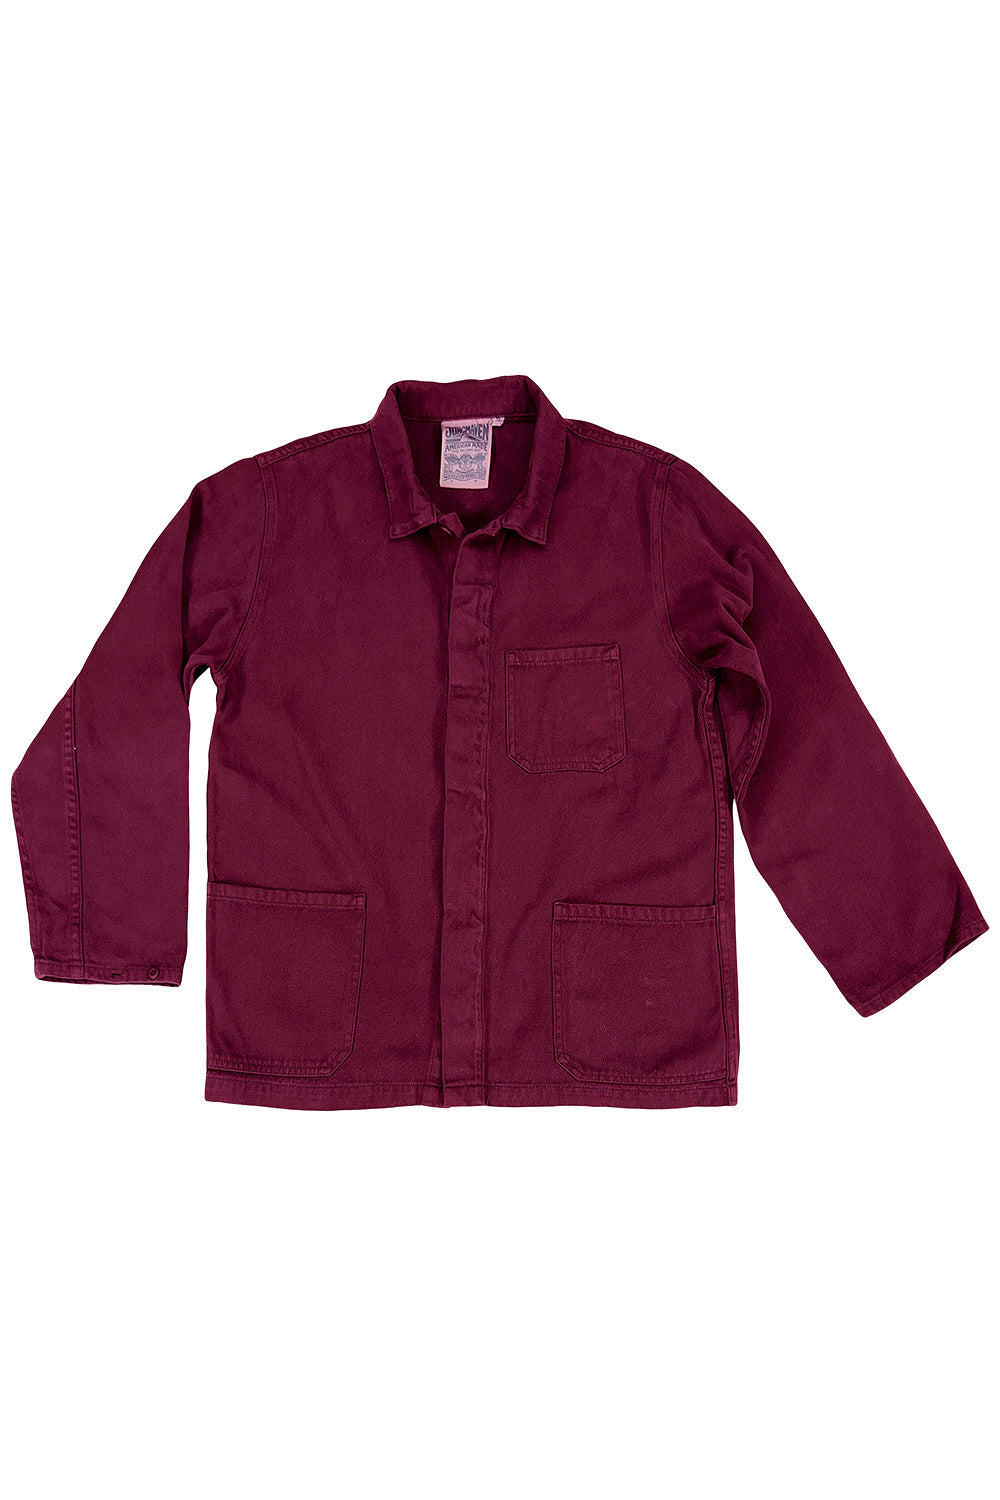 Olympic Jacket | Jungmaven Hemp Clothing & Accessories / Color: Burgundy